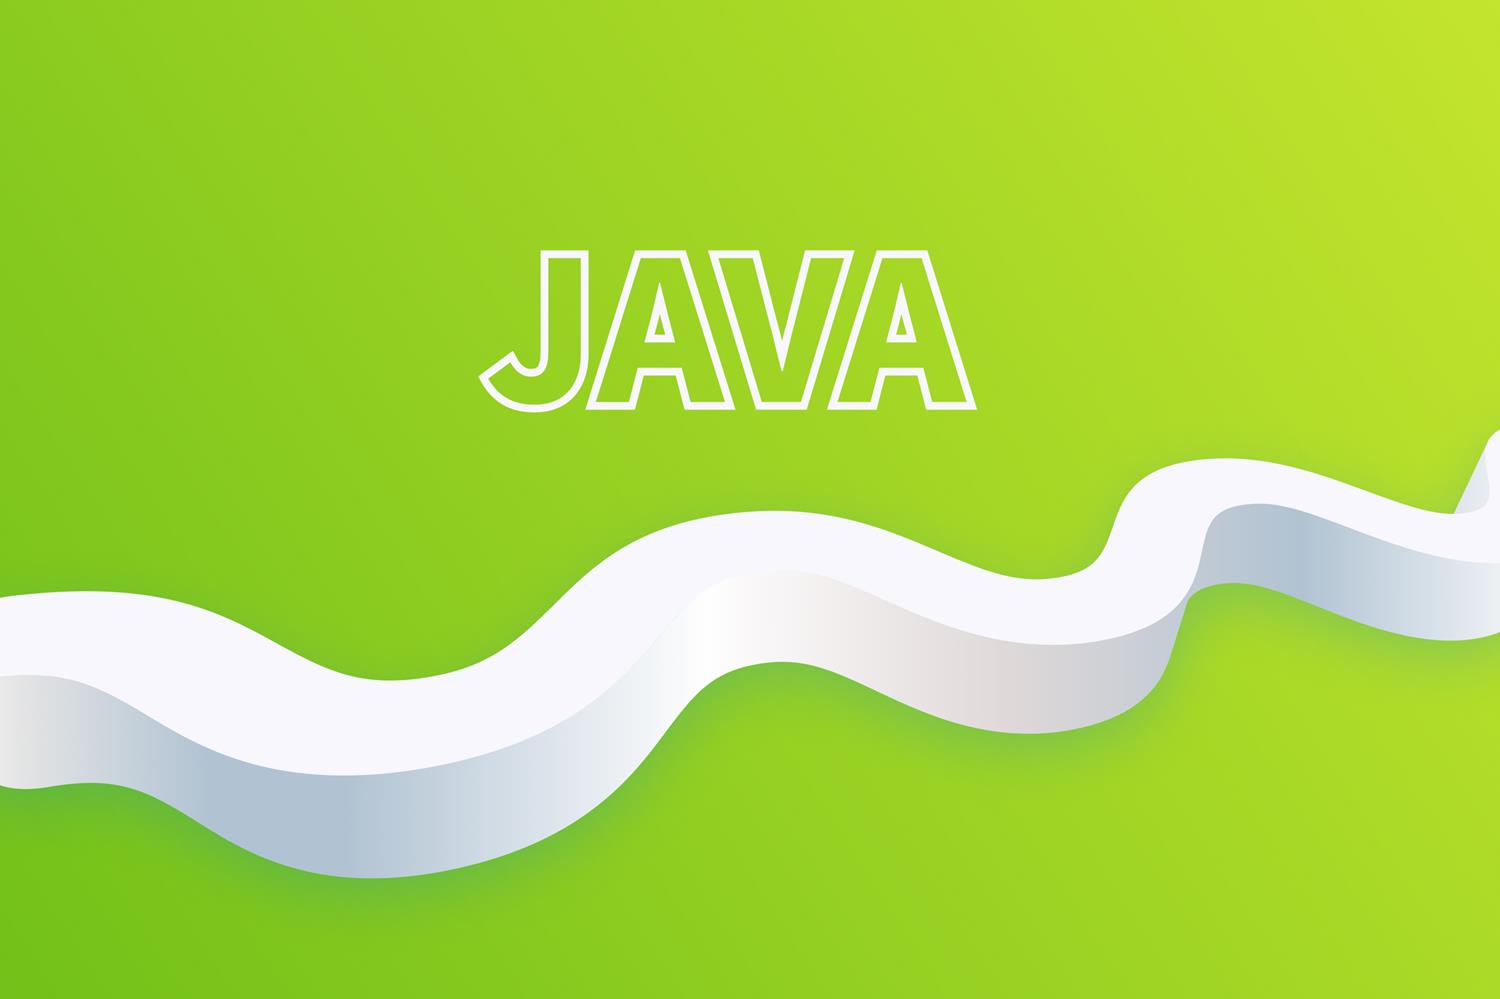 From Junior to a good Java developer: a roadmap for beginners